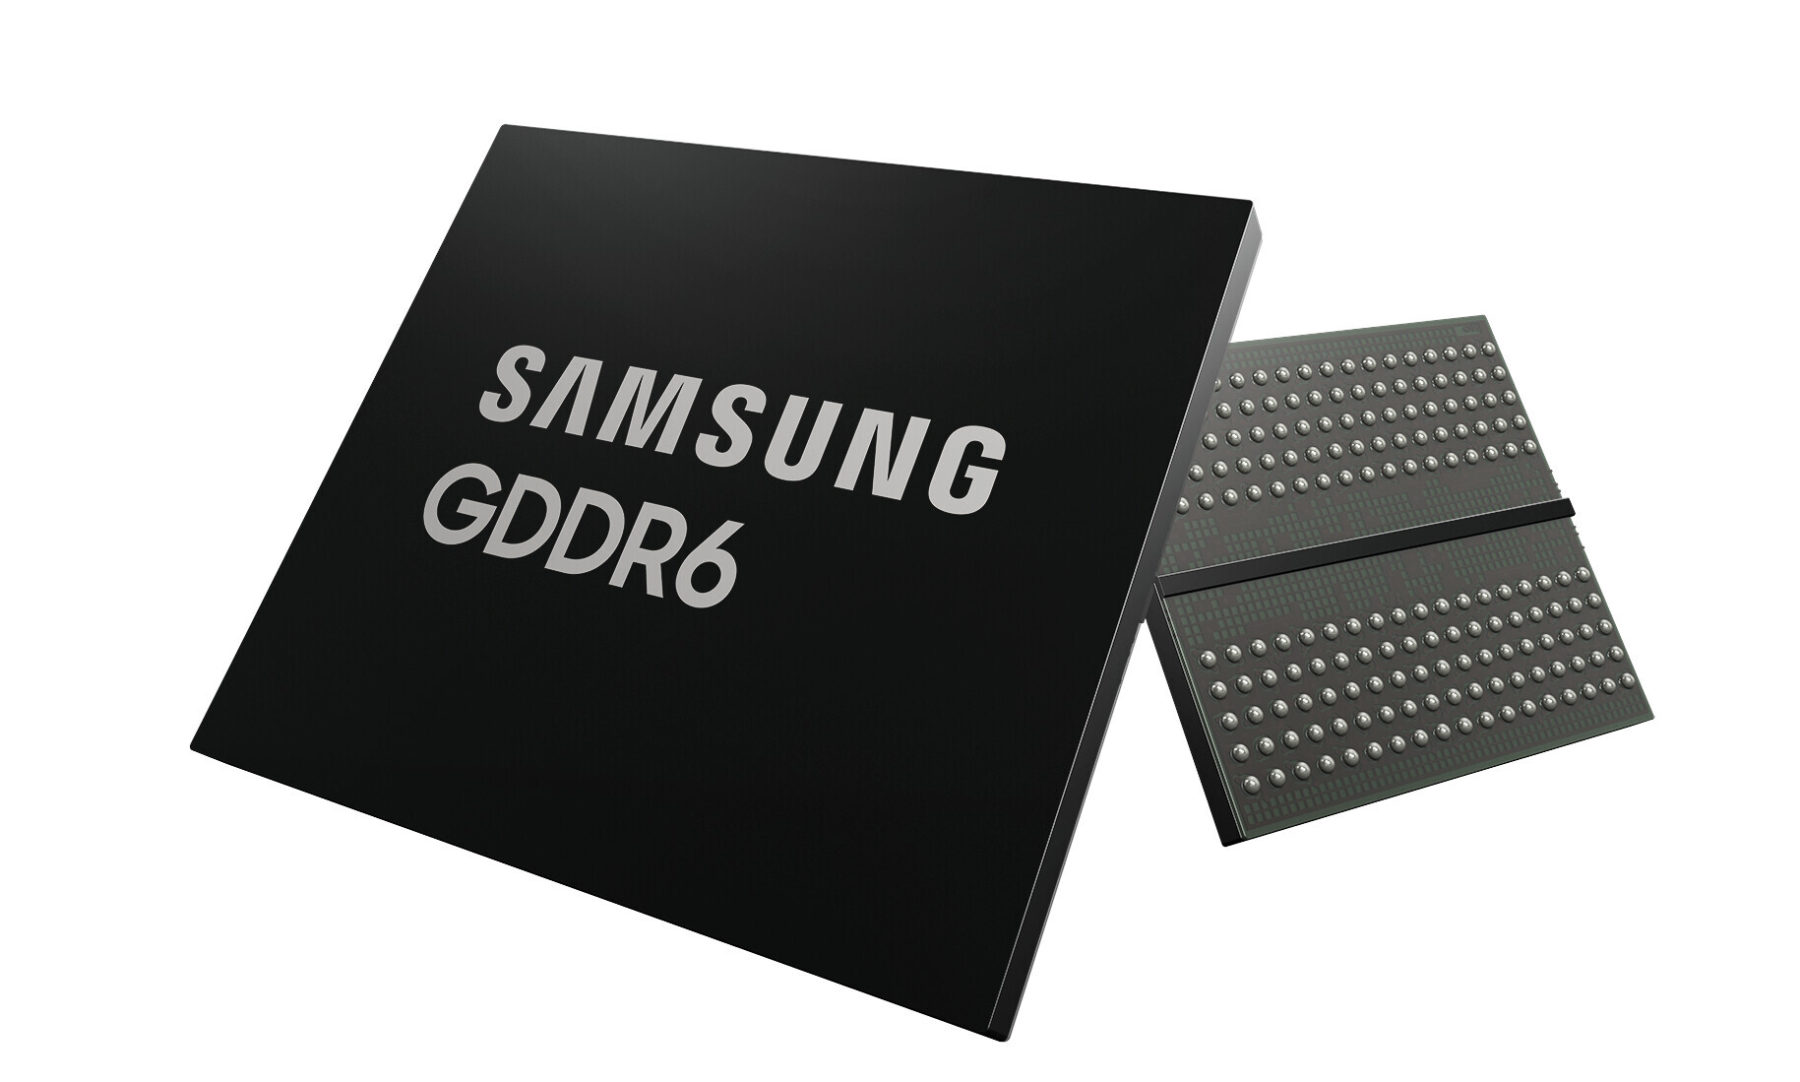 Samsung Launches Industry's First 24Gbps GDDR6 Memory - returnal